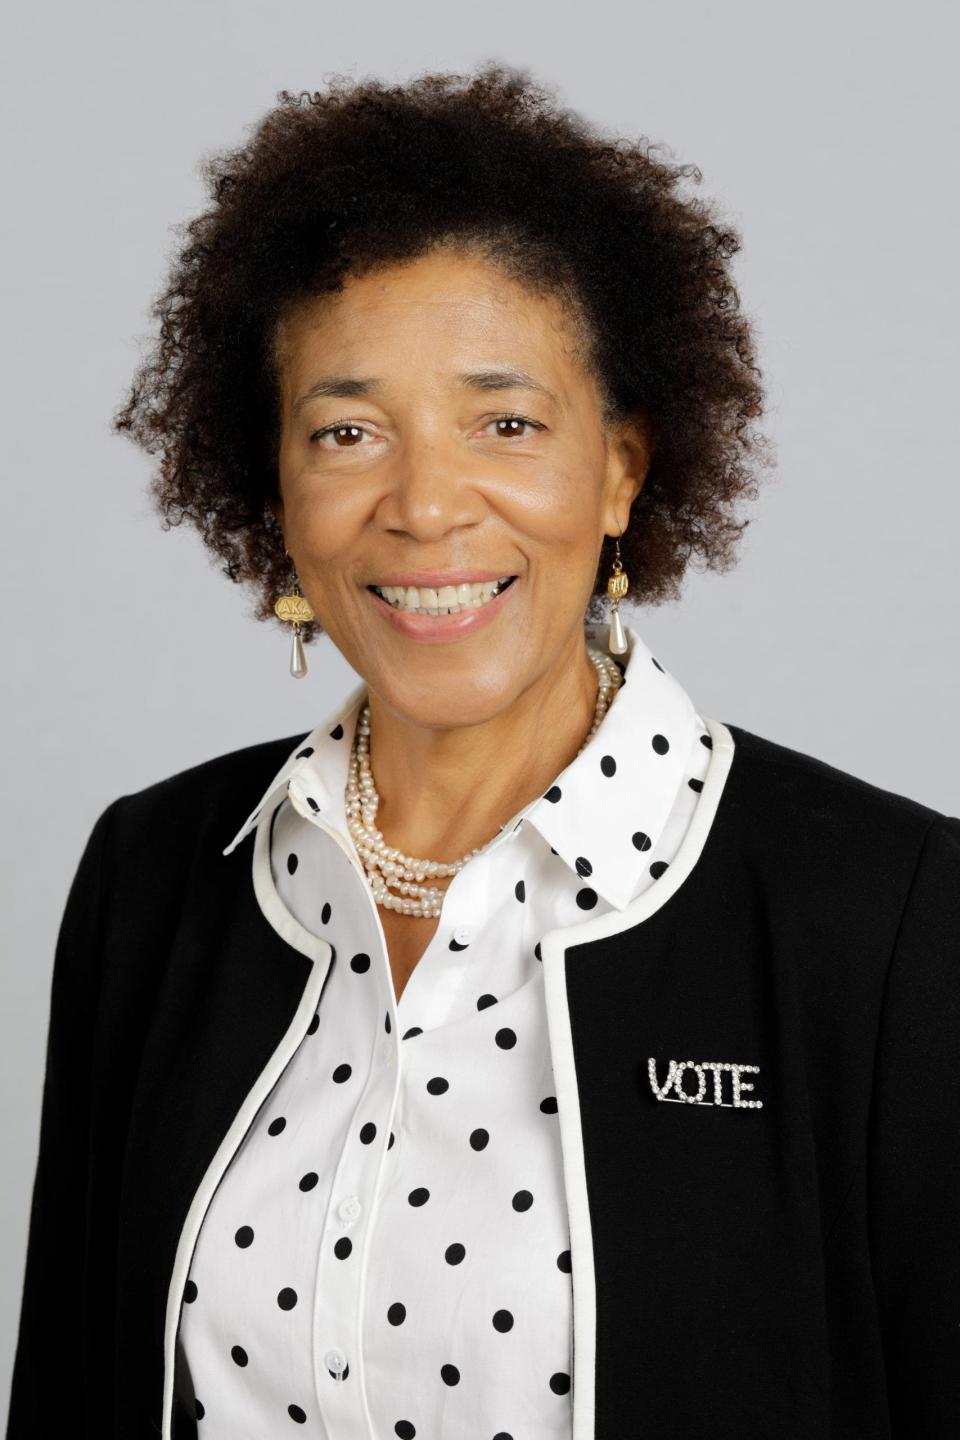 Cecile M. Scoon is the president of the League of Women Voters of Florida and an owner and managing principal of Peters & Scoon Attorneys at Law.